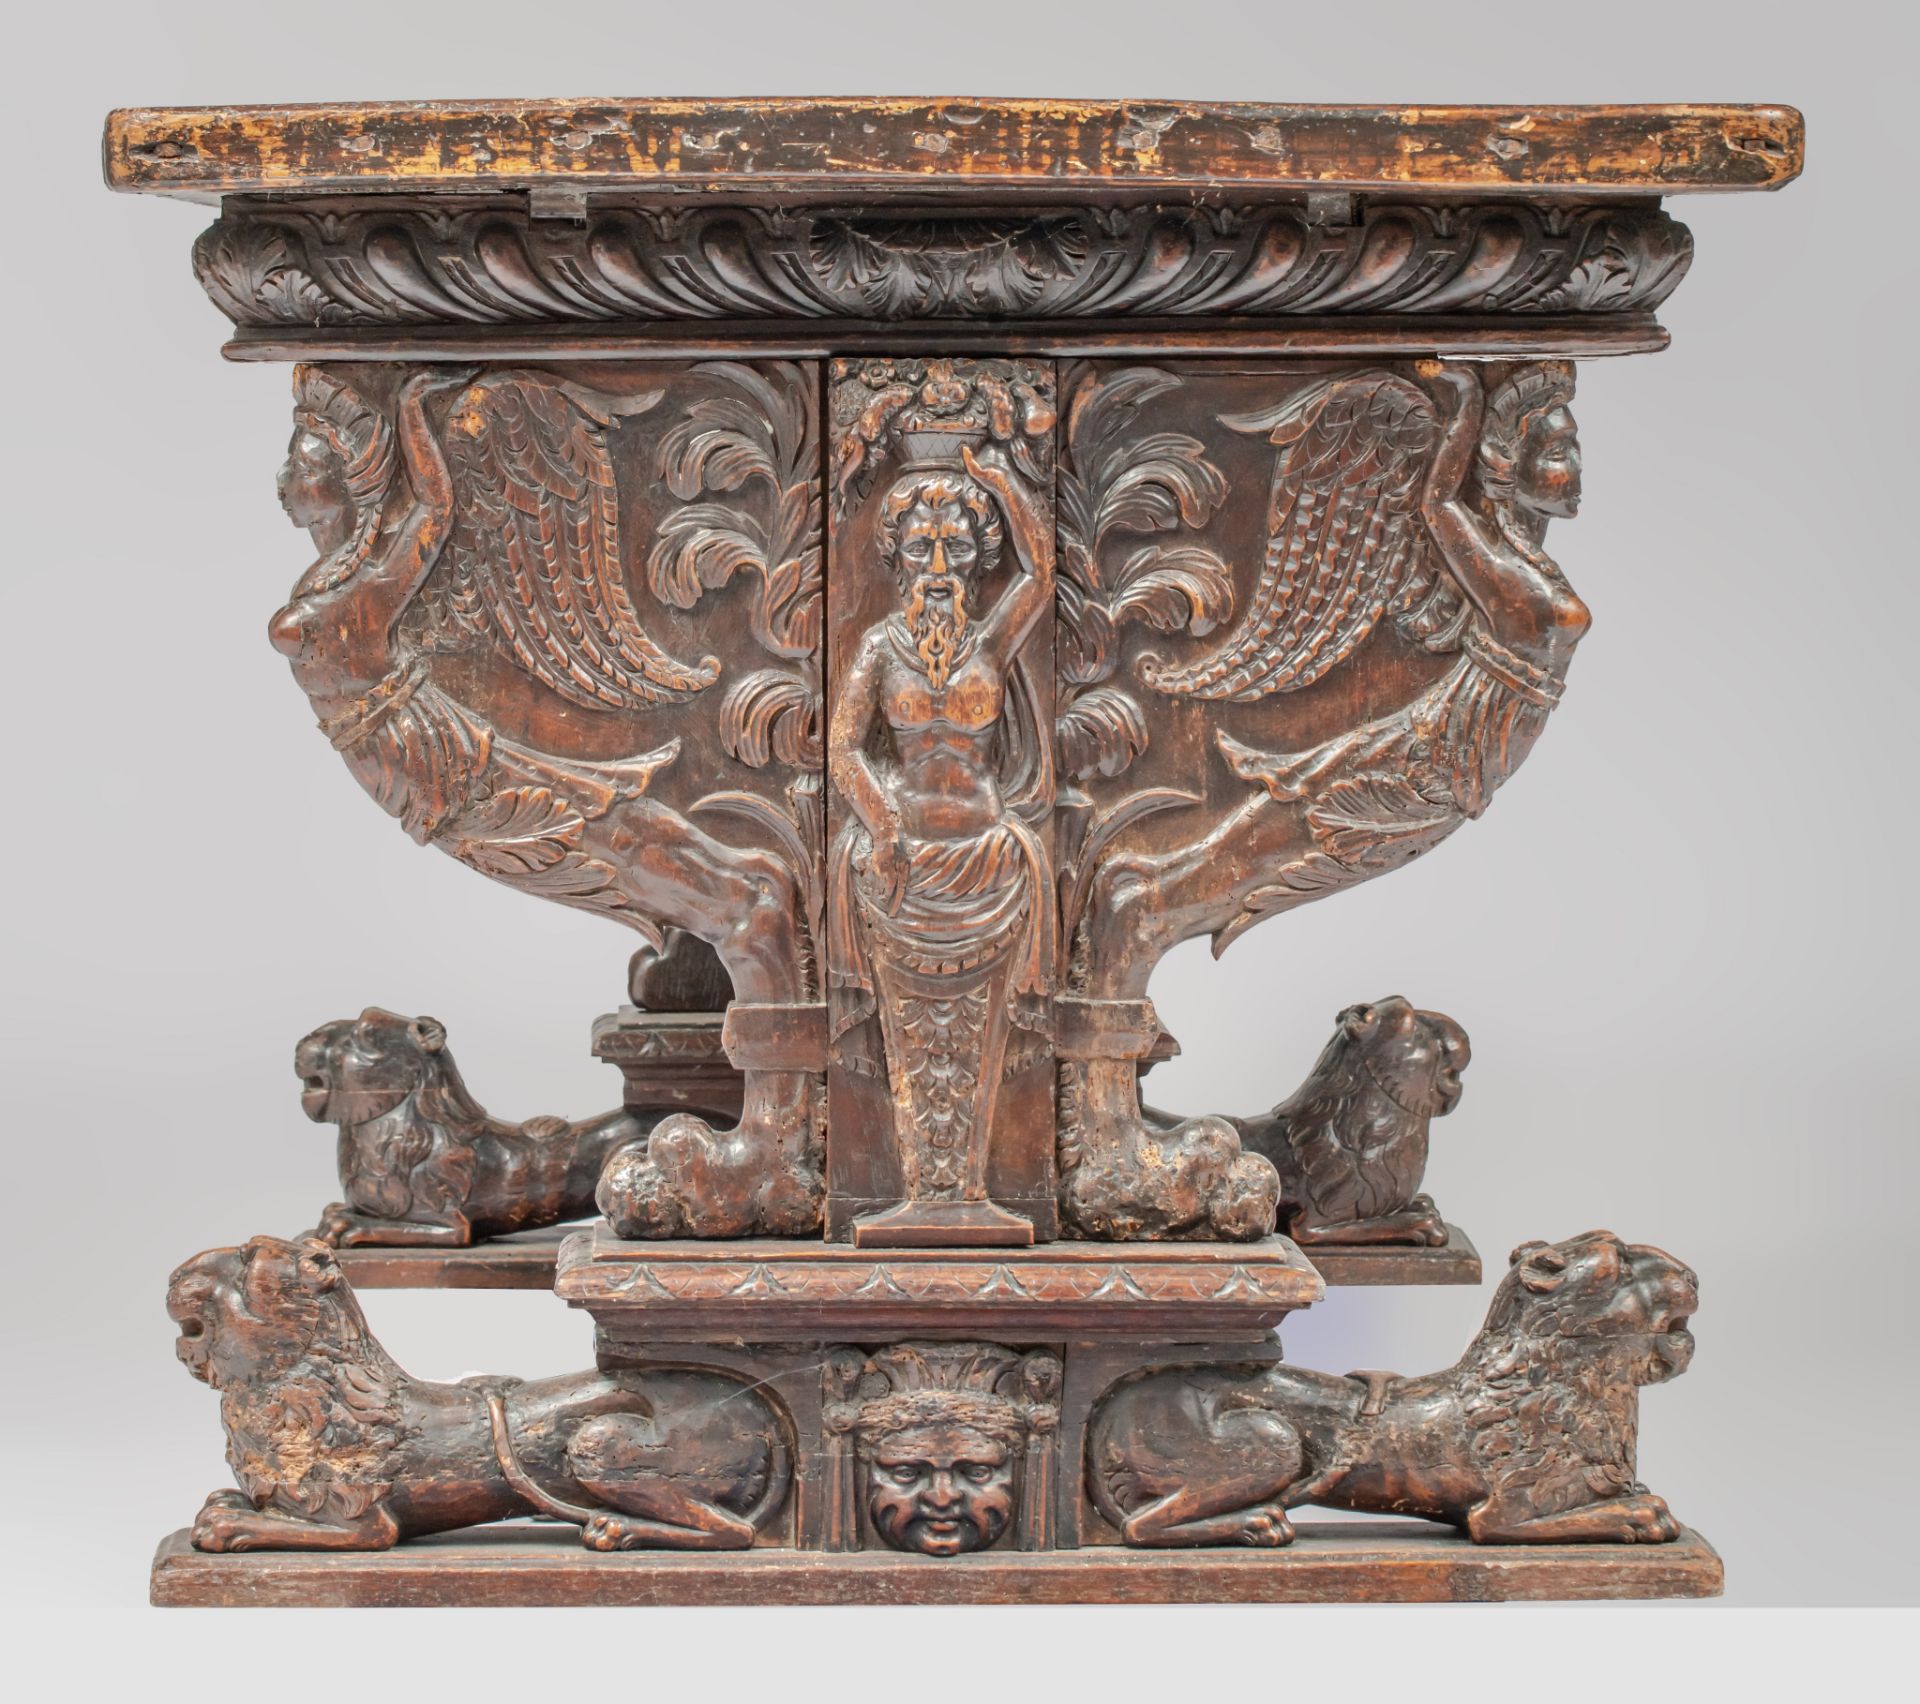 An exceptional Italian Renaissance carved walnut centre table, 16th/17thC, H 82 - W 165 - D 86,5 cm - Image 4 of 12